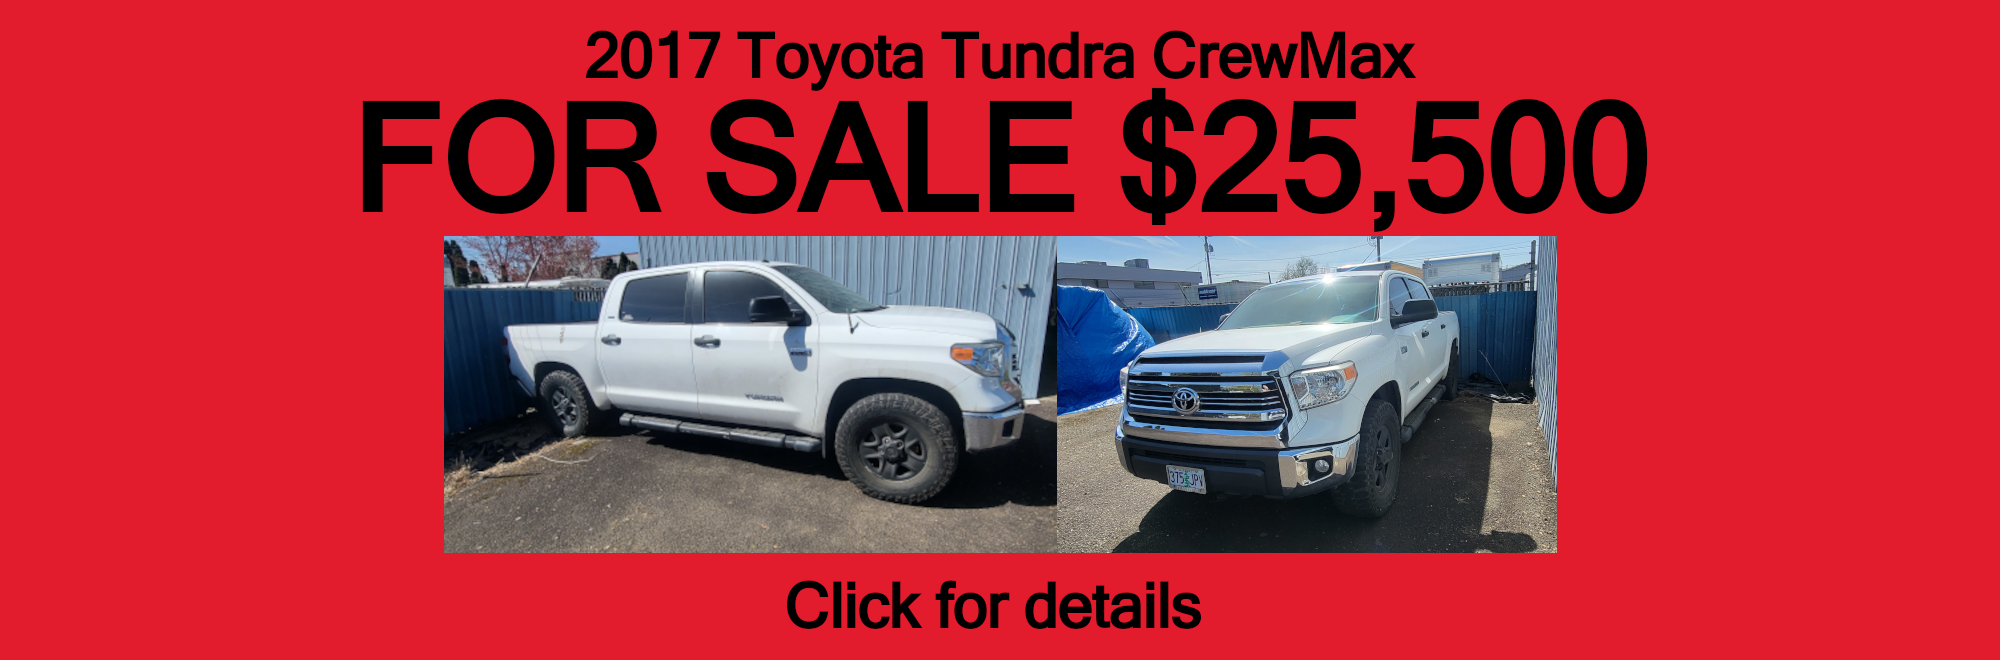 2017 Toyota Tundra CrewMax For Sale $25,500 Click for details